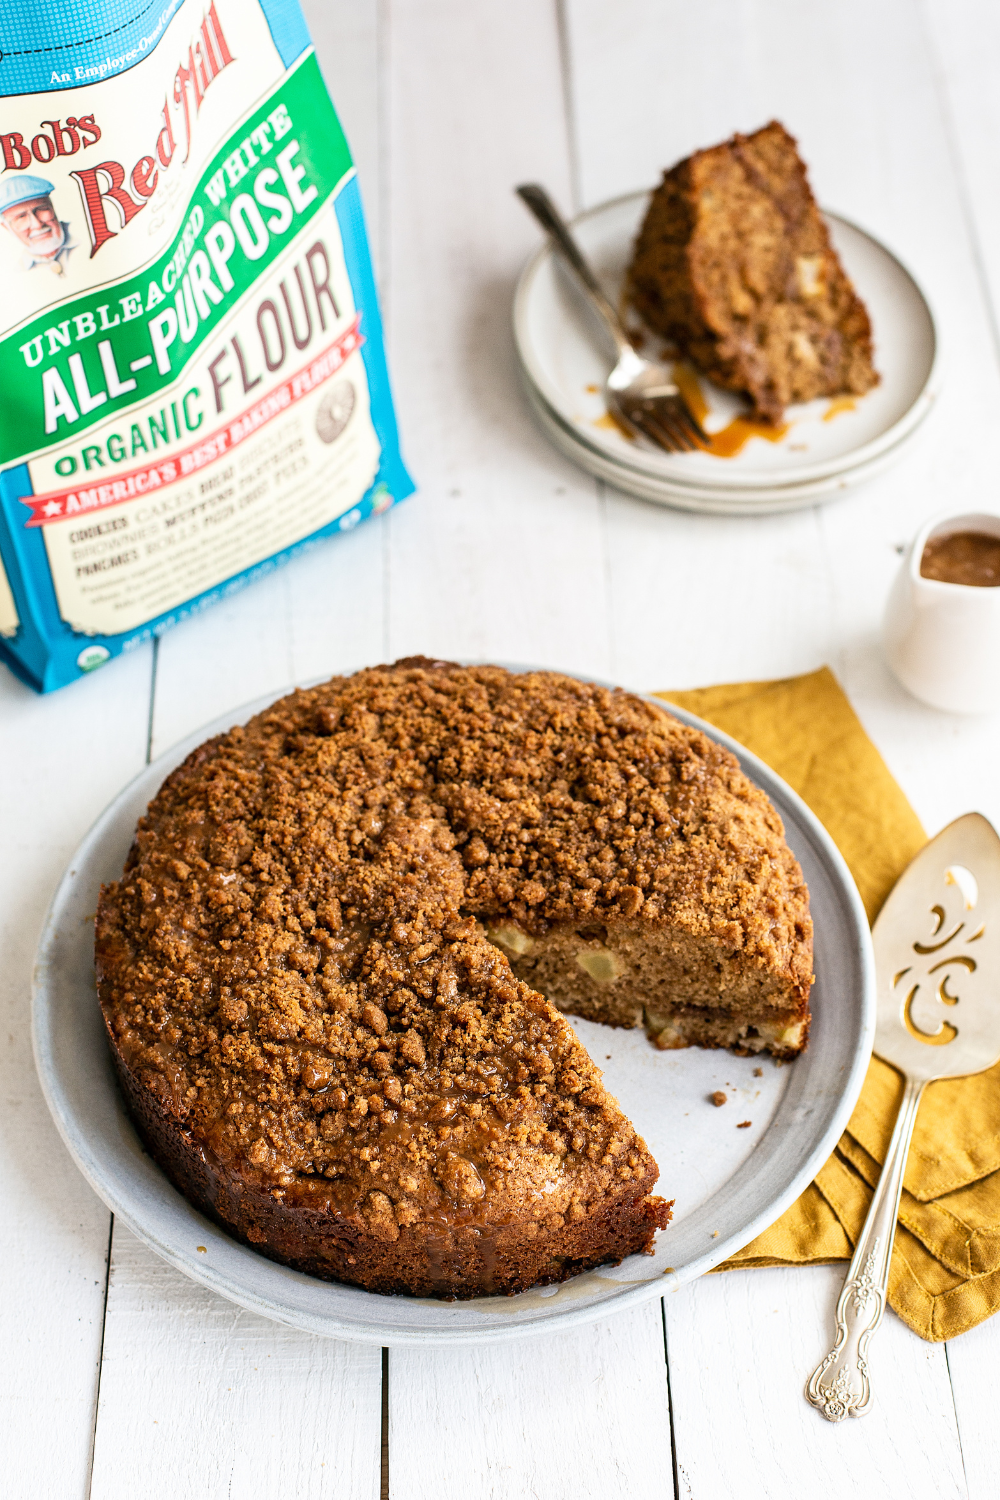 Bob's Red Mill flour being used in my apple coffee cake